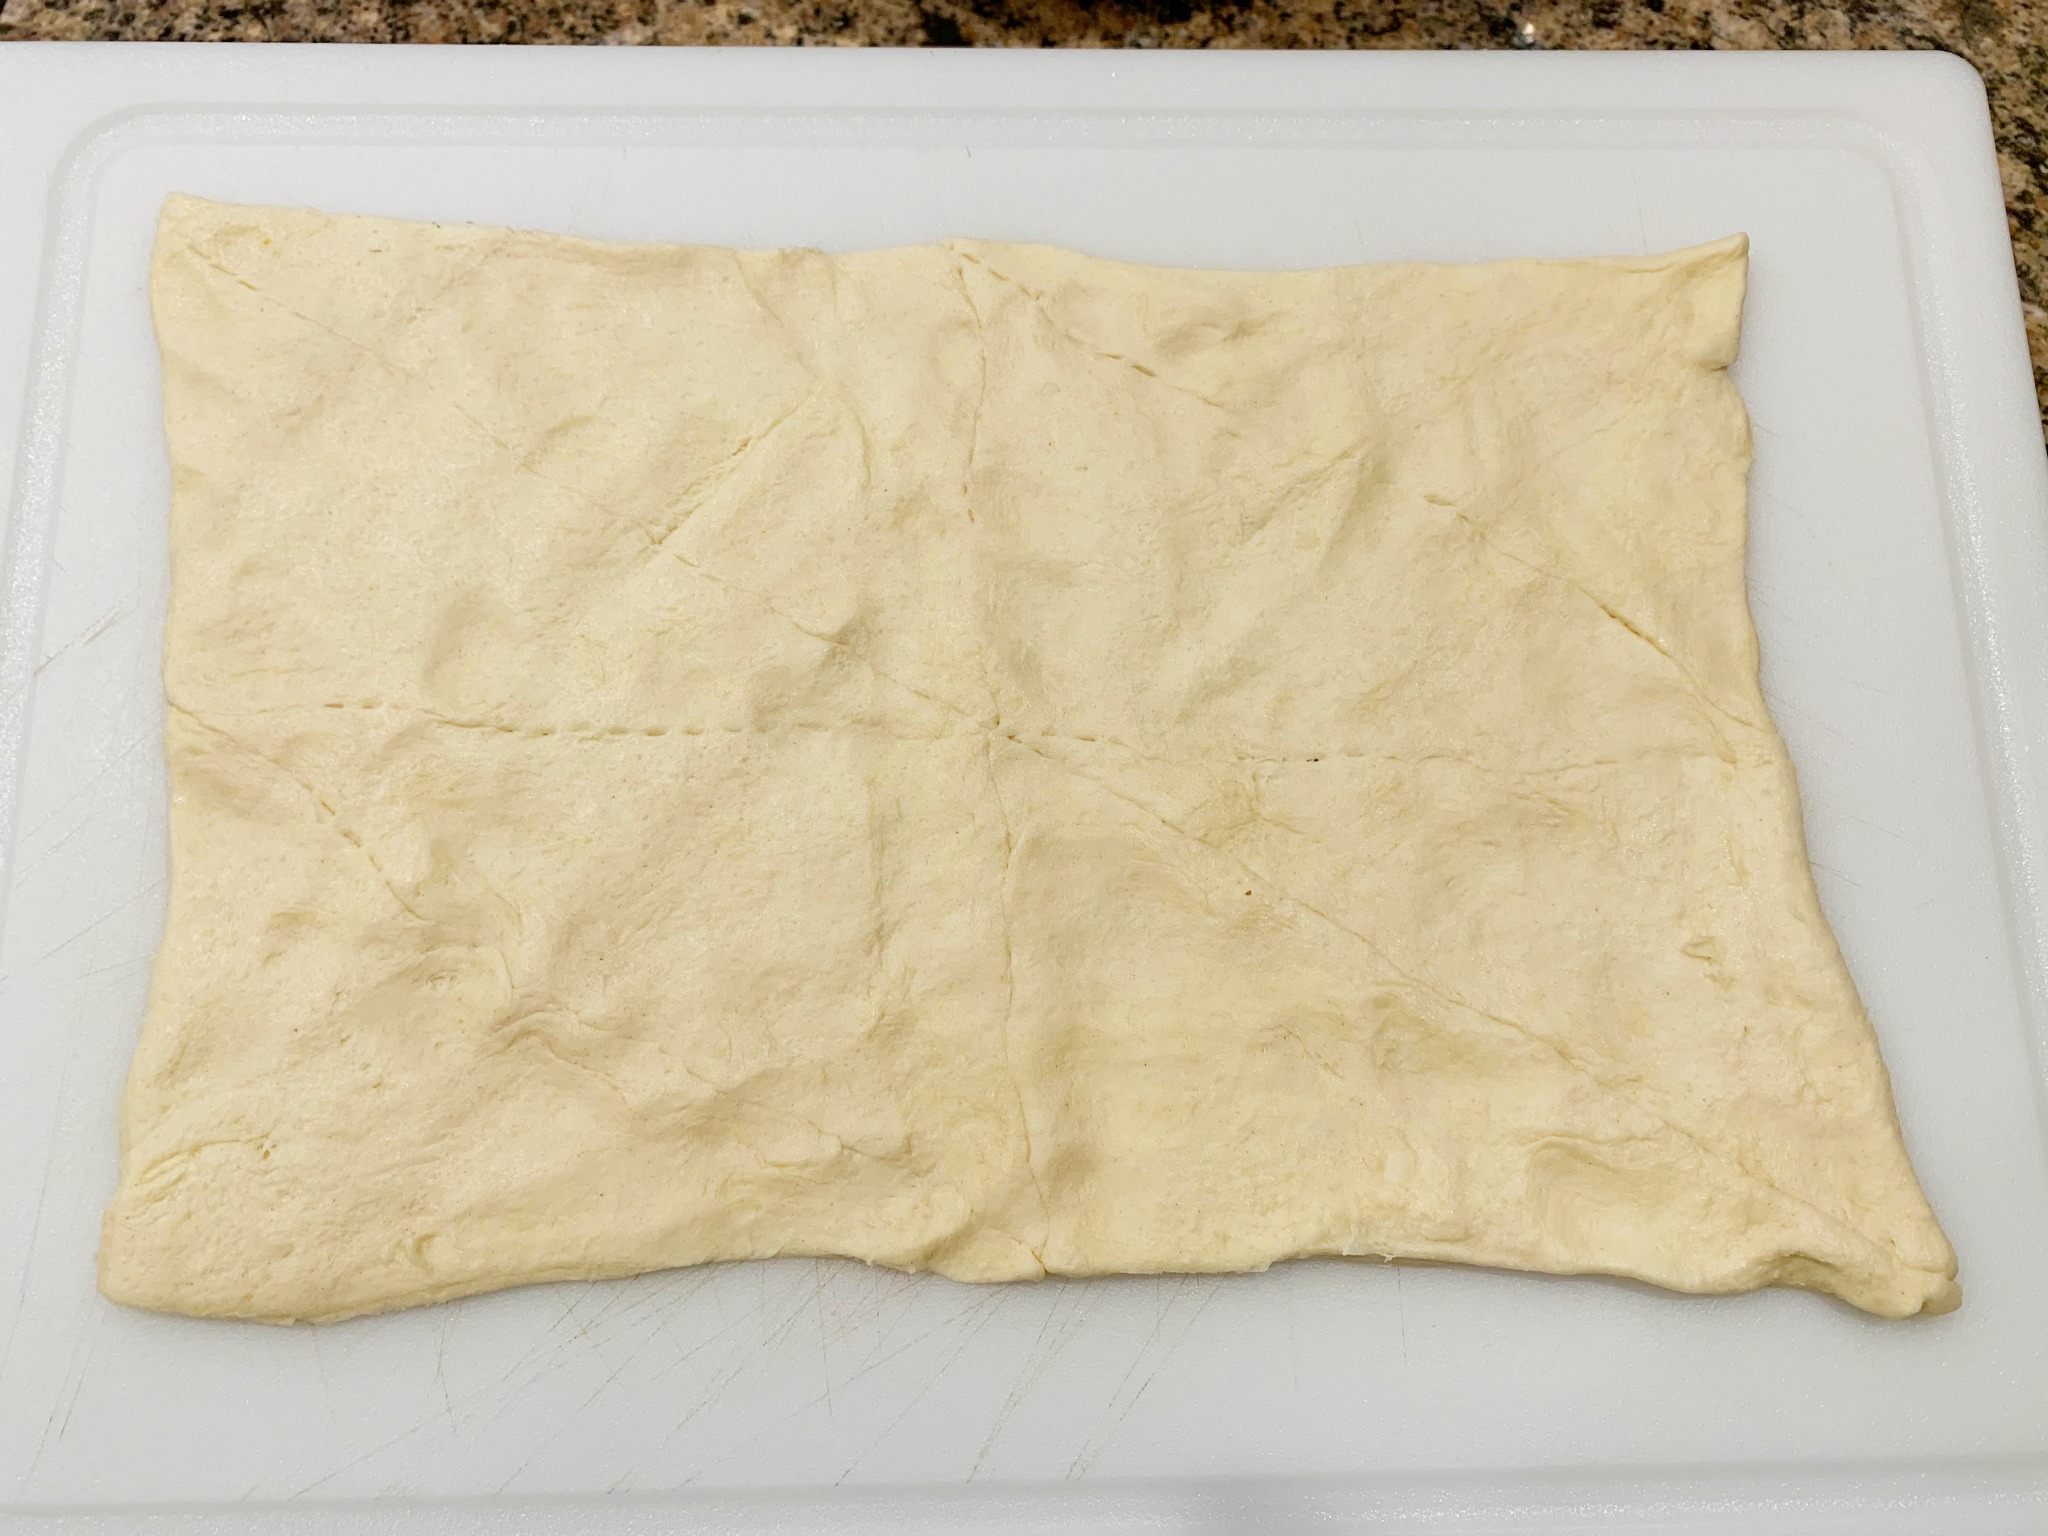 crescent rolls rolled out on a white cutting board with seams pinched togeher